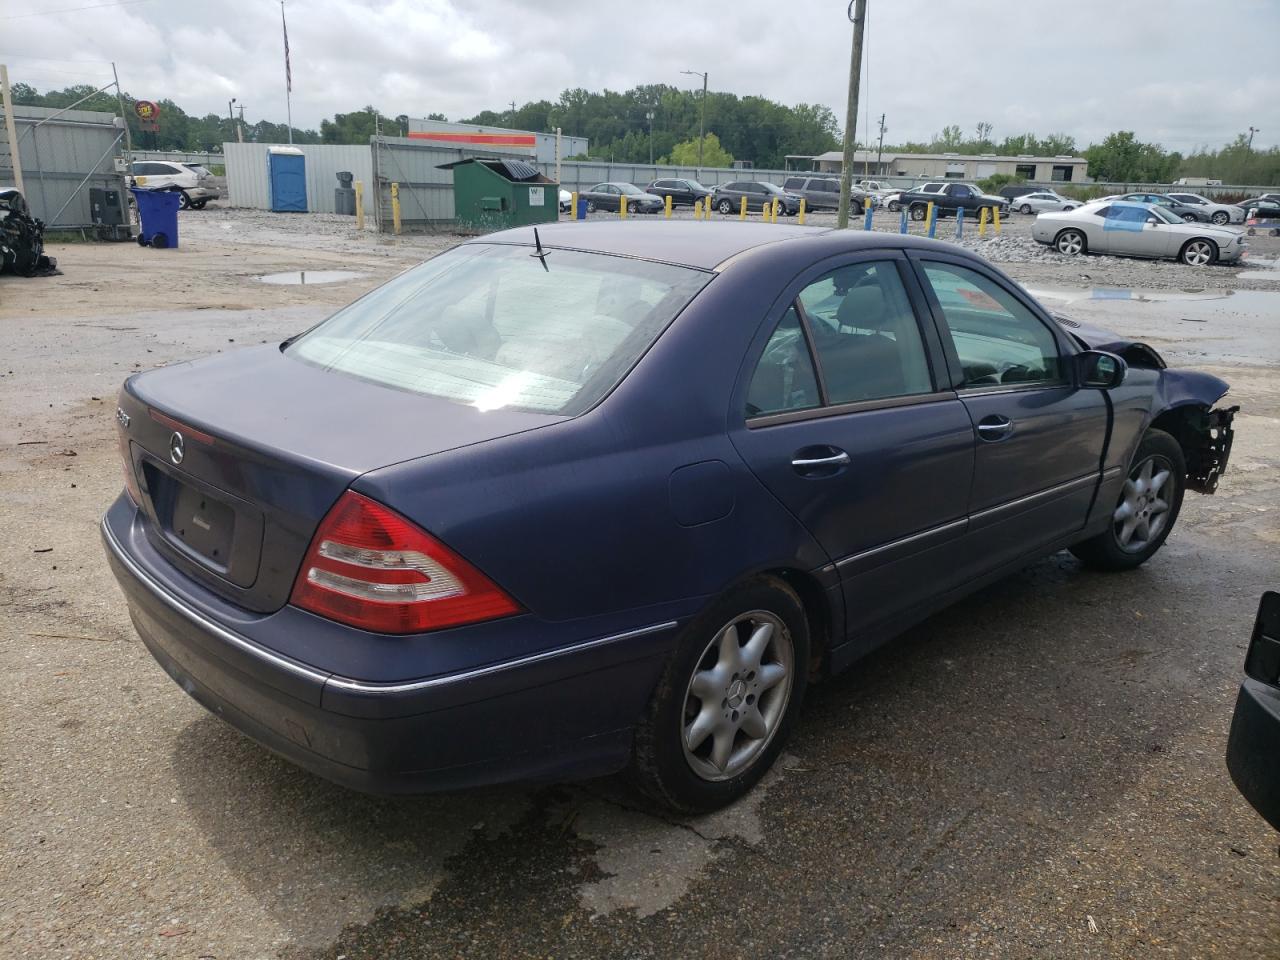 WDBRF54H76A****** Salvage and Repairable 2006 Mercedes-Benz C-Class in AL - Montgomery